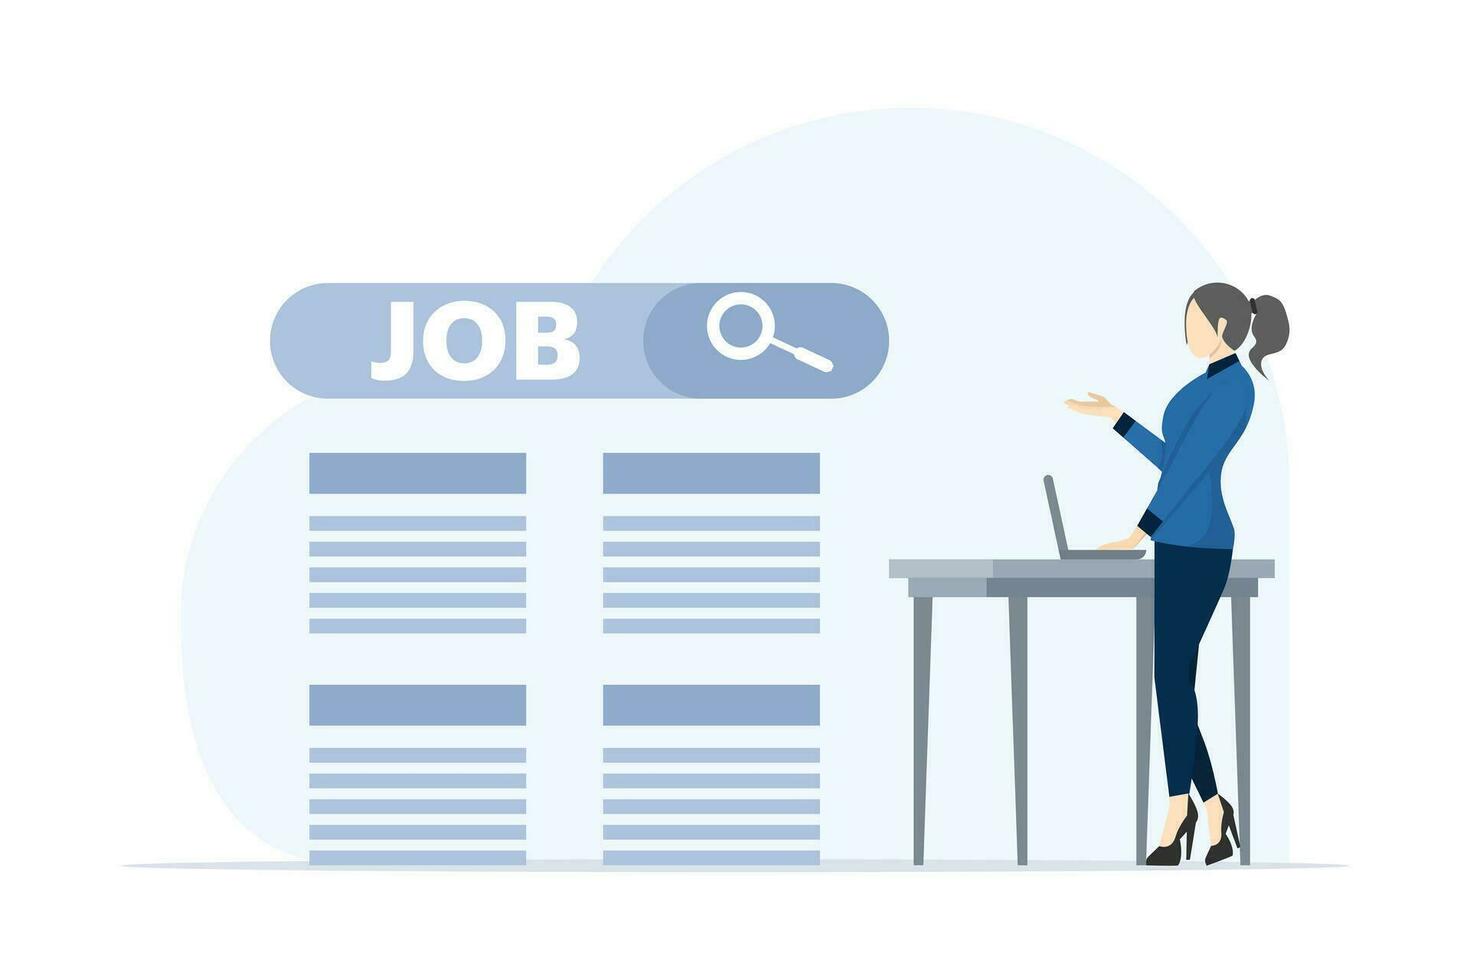 Career or job search concept, Looking for a new job, job, looking for opportunities, looking for vacancies or job positions, character using laptop to search for work. flat vector illustration.